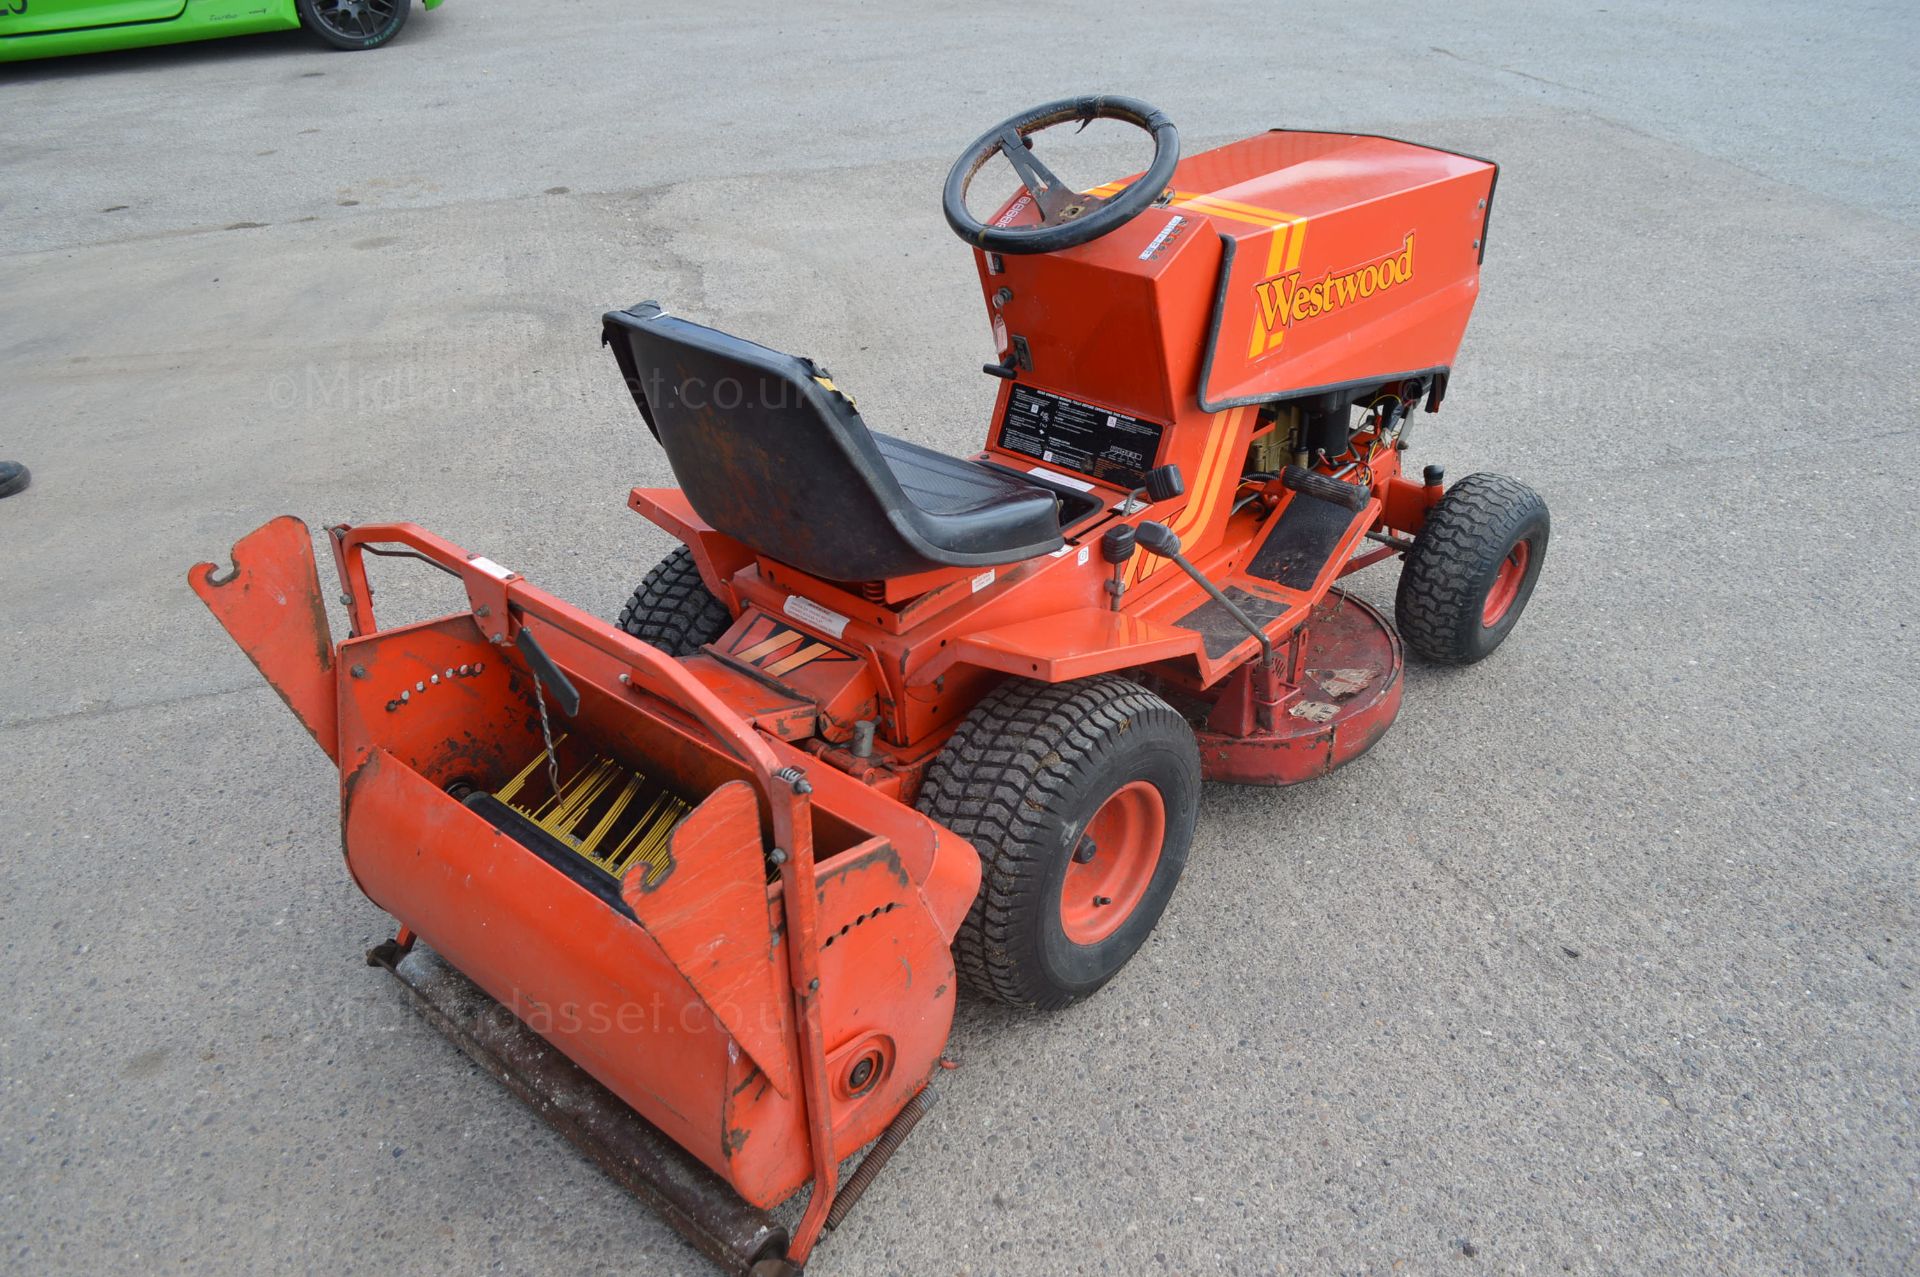 WESTWOOD T1200 RIDE ON MOWER - Image 6 of 12